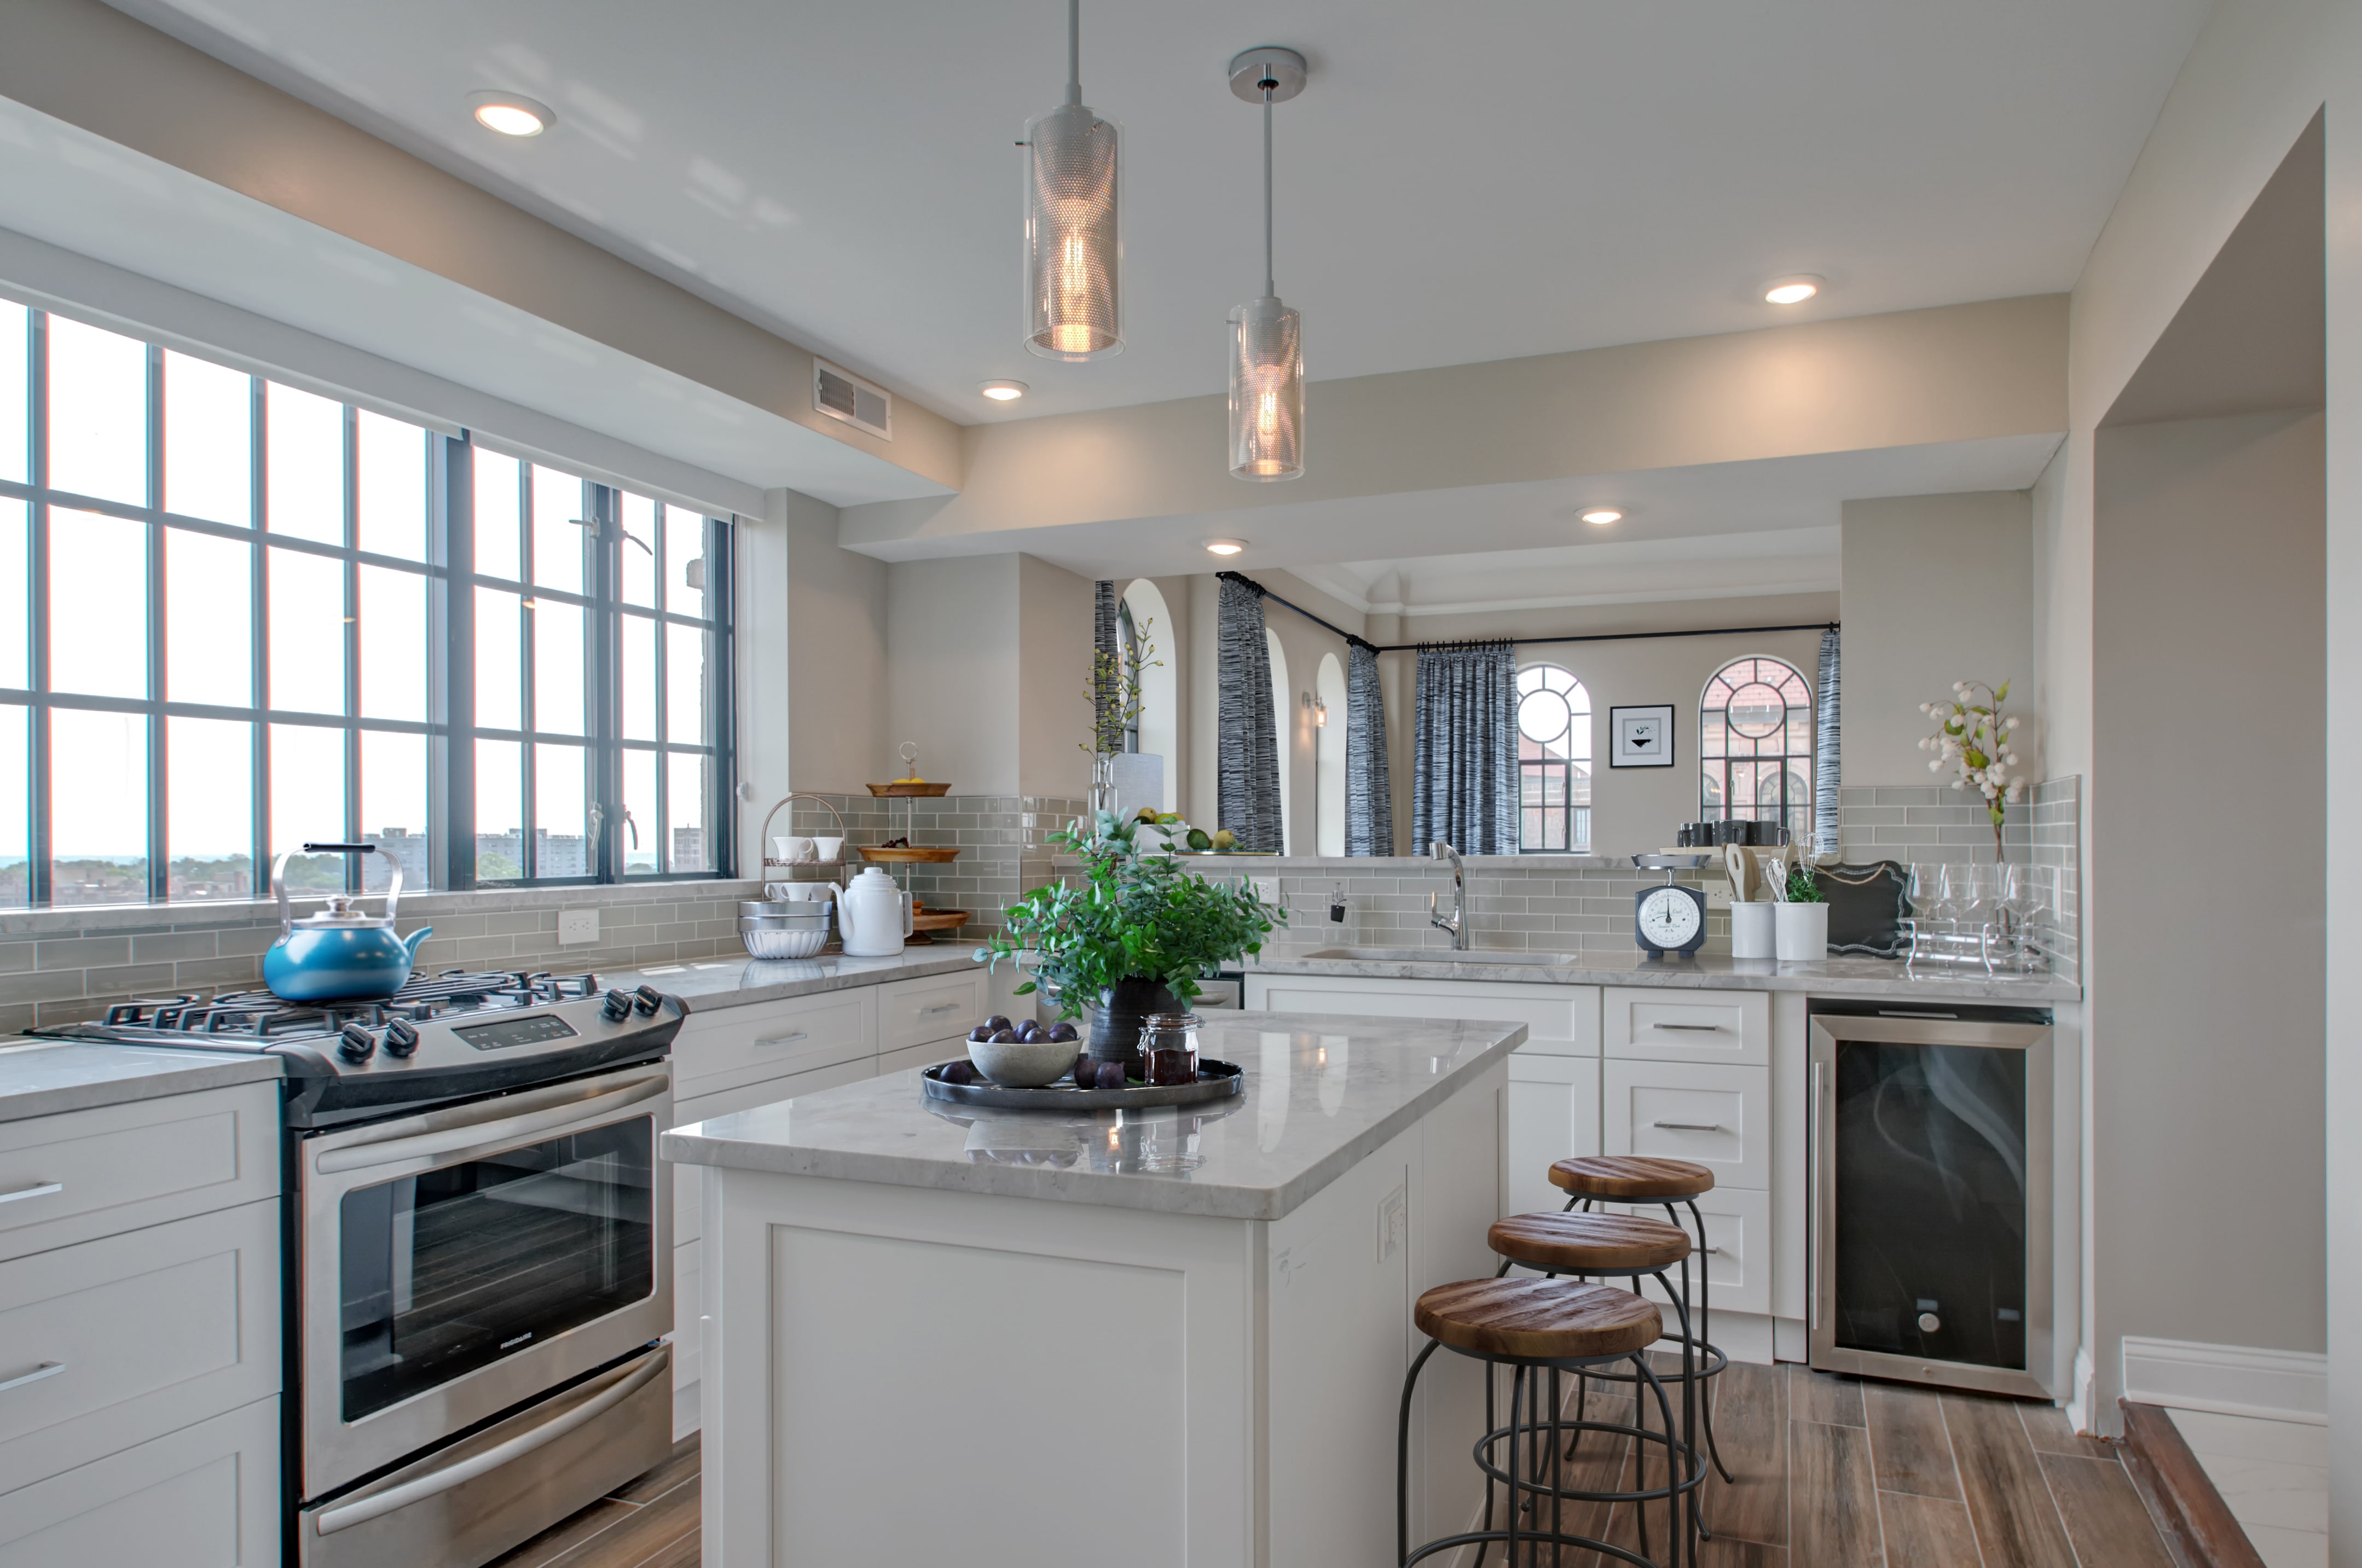 Virtual staging services by LCP Media of a luxury kitchen